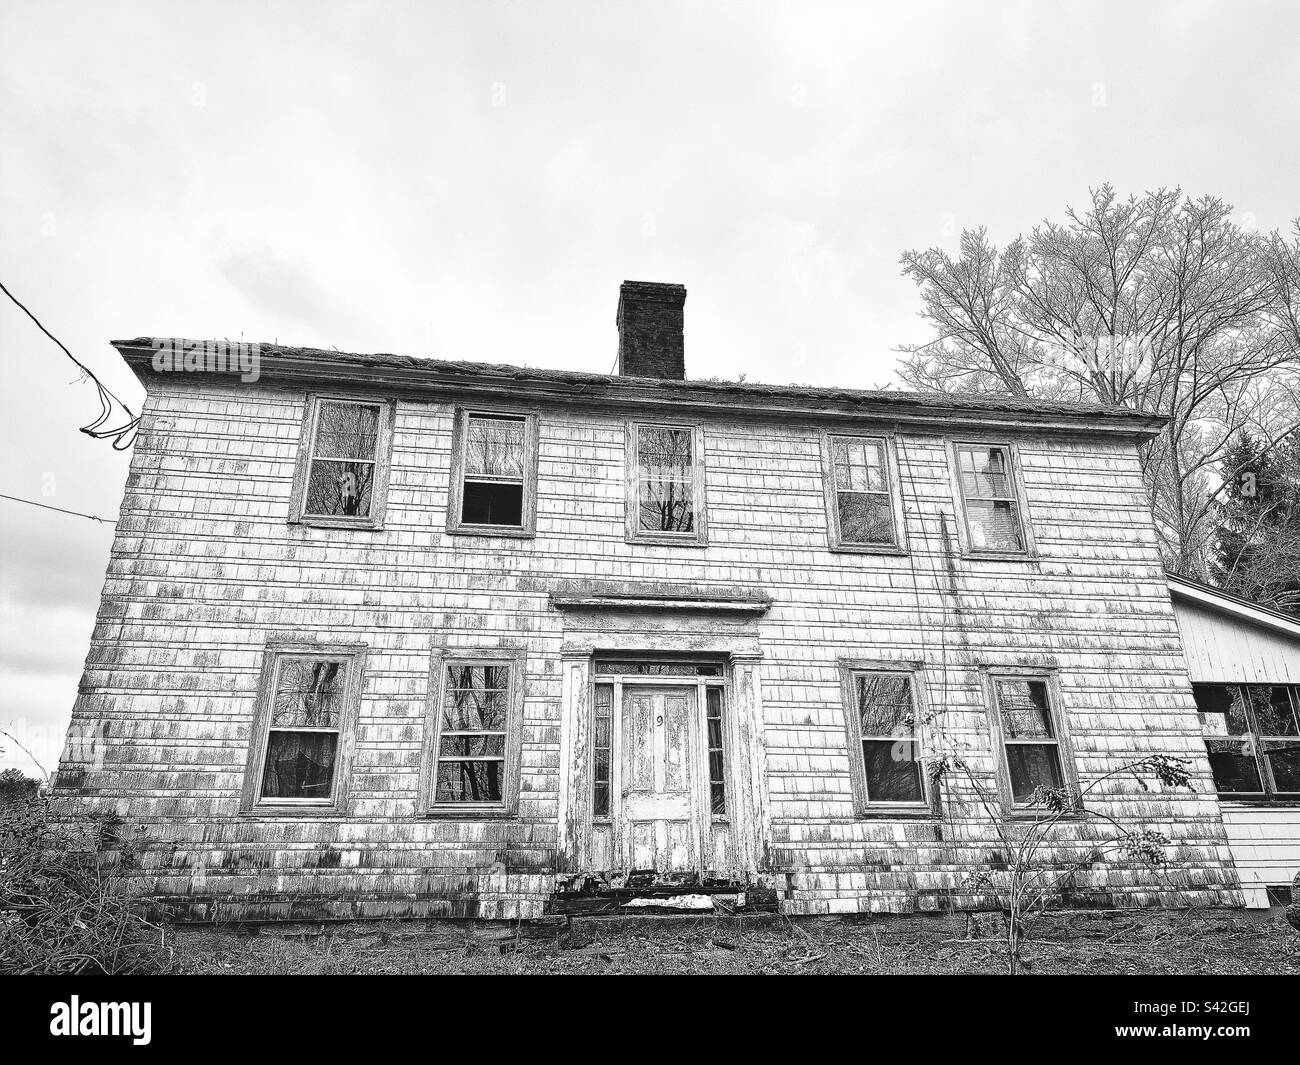 Black-and-white photo of an old, rundown white farmhouse in Lebanon, Connecticut during winter. The exterior looks dirty, and is deteriorating. Stock Photo